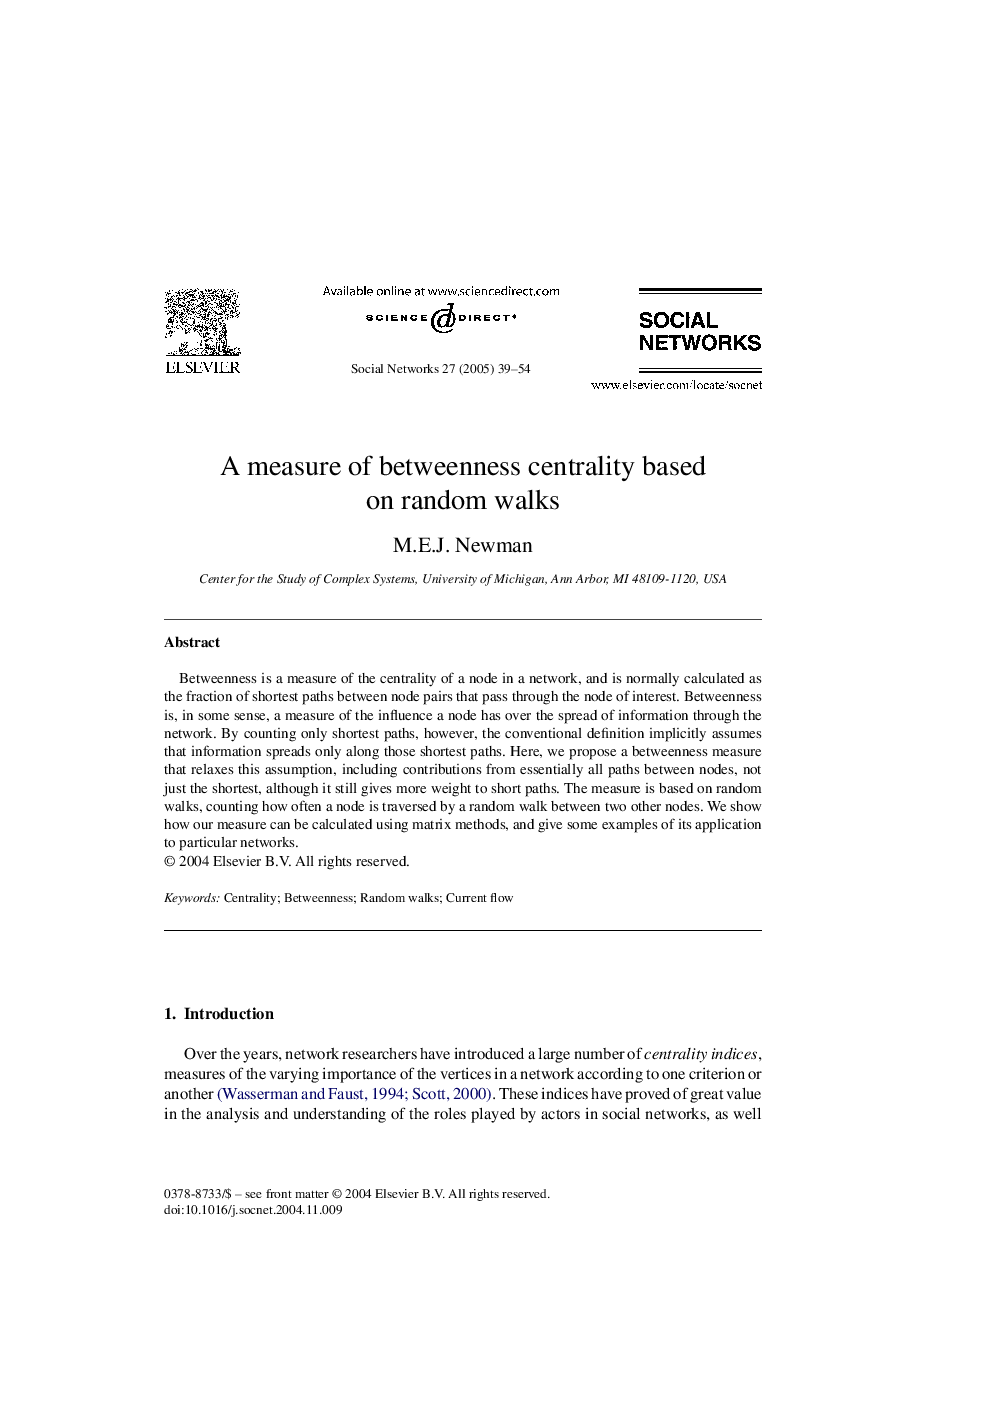 A measure of betweenness centrality based on random walks